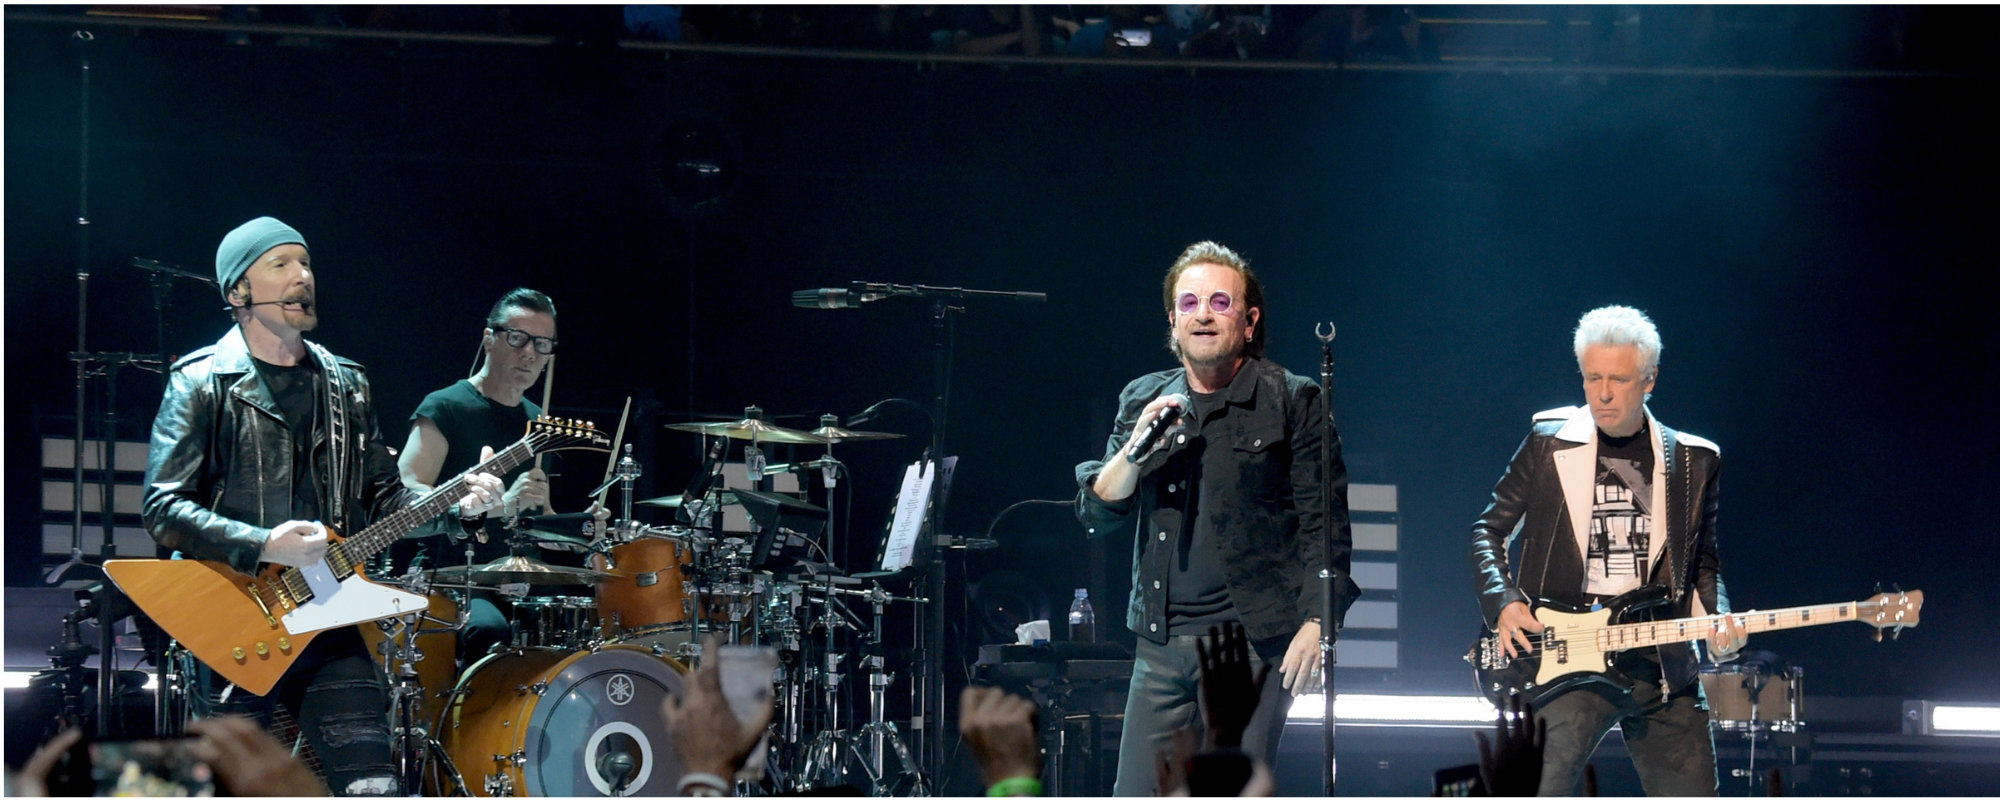 Must-See Live Concerts by U2 From the Comfort of Your Home